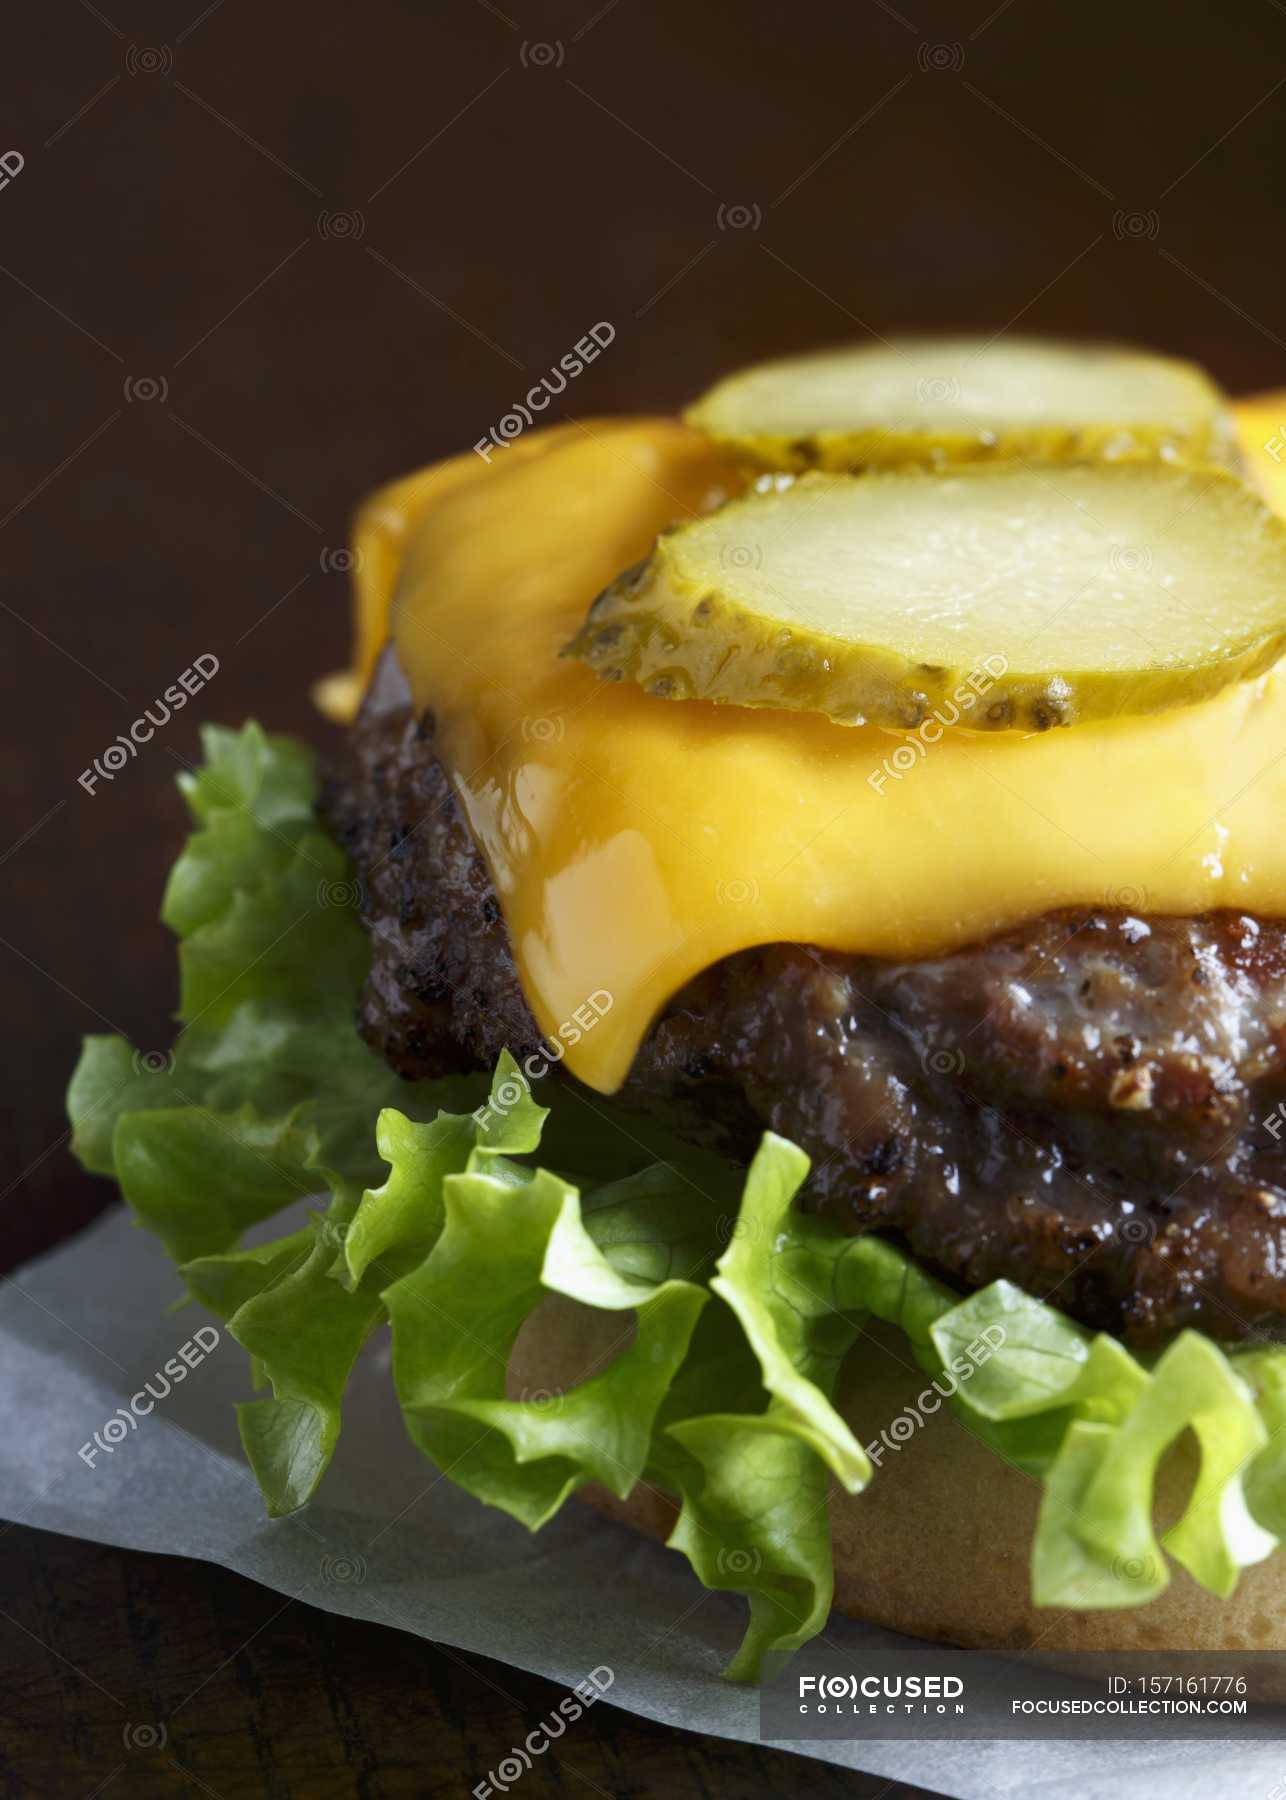 Grilled beef burger — cheese, cookery - Stock Photo | #157161776